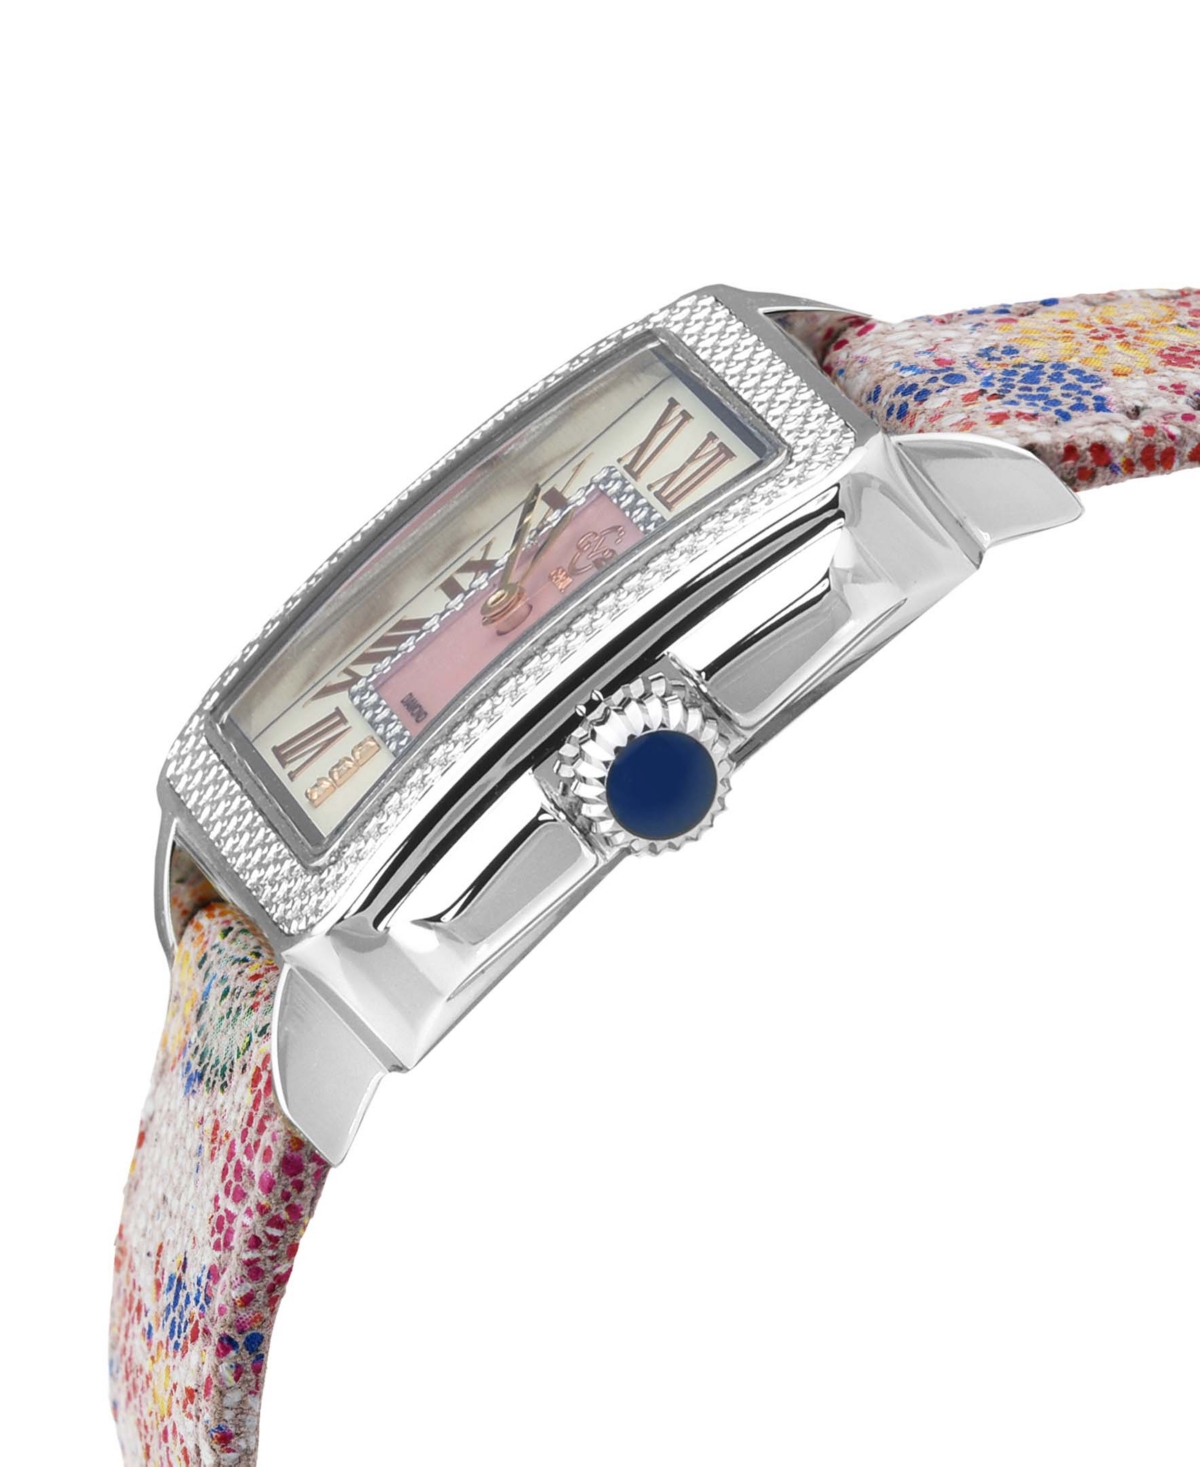 Shop Gv2 By Gevril Women's Swiss Quartz Padova Floral White Leather Watch 30mm